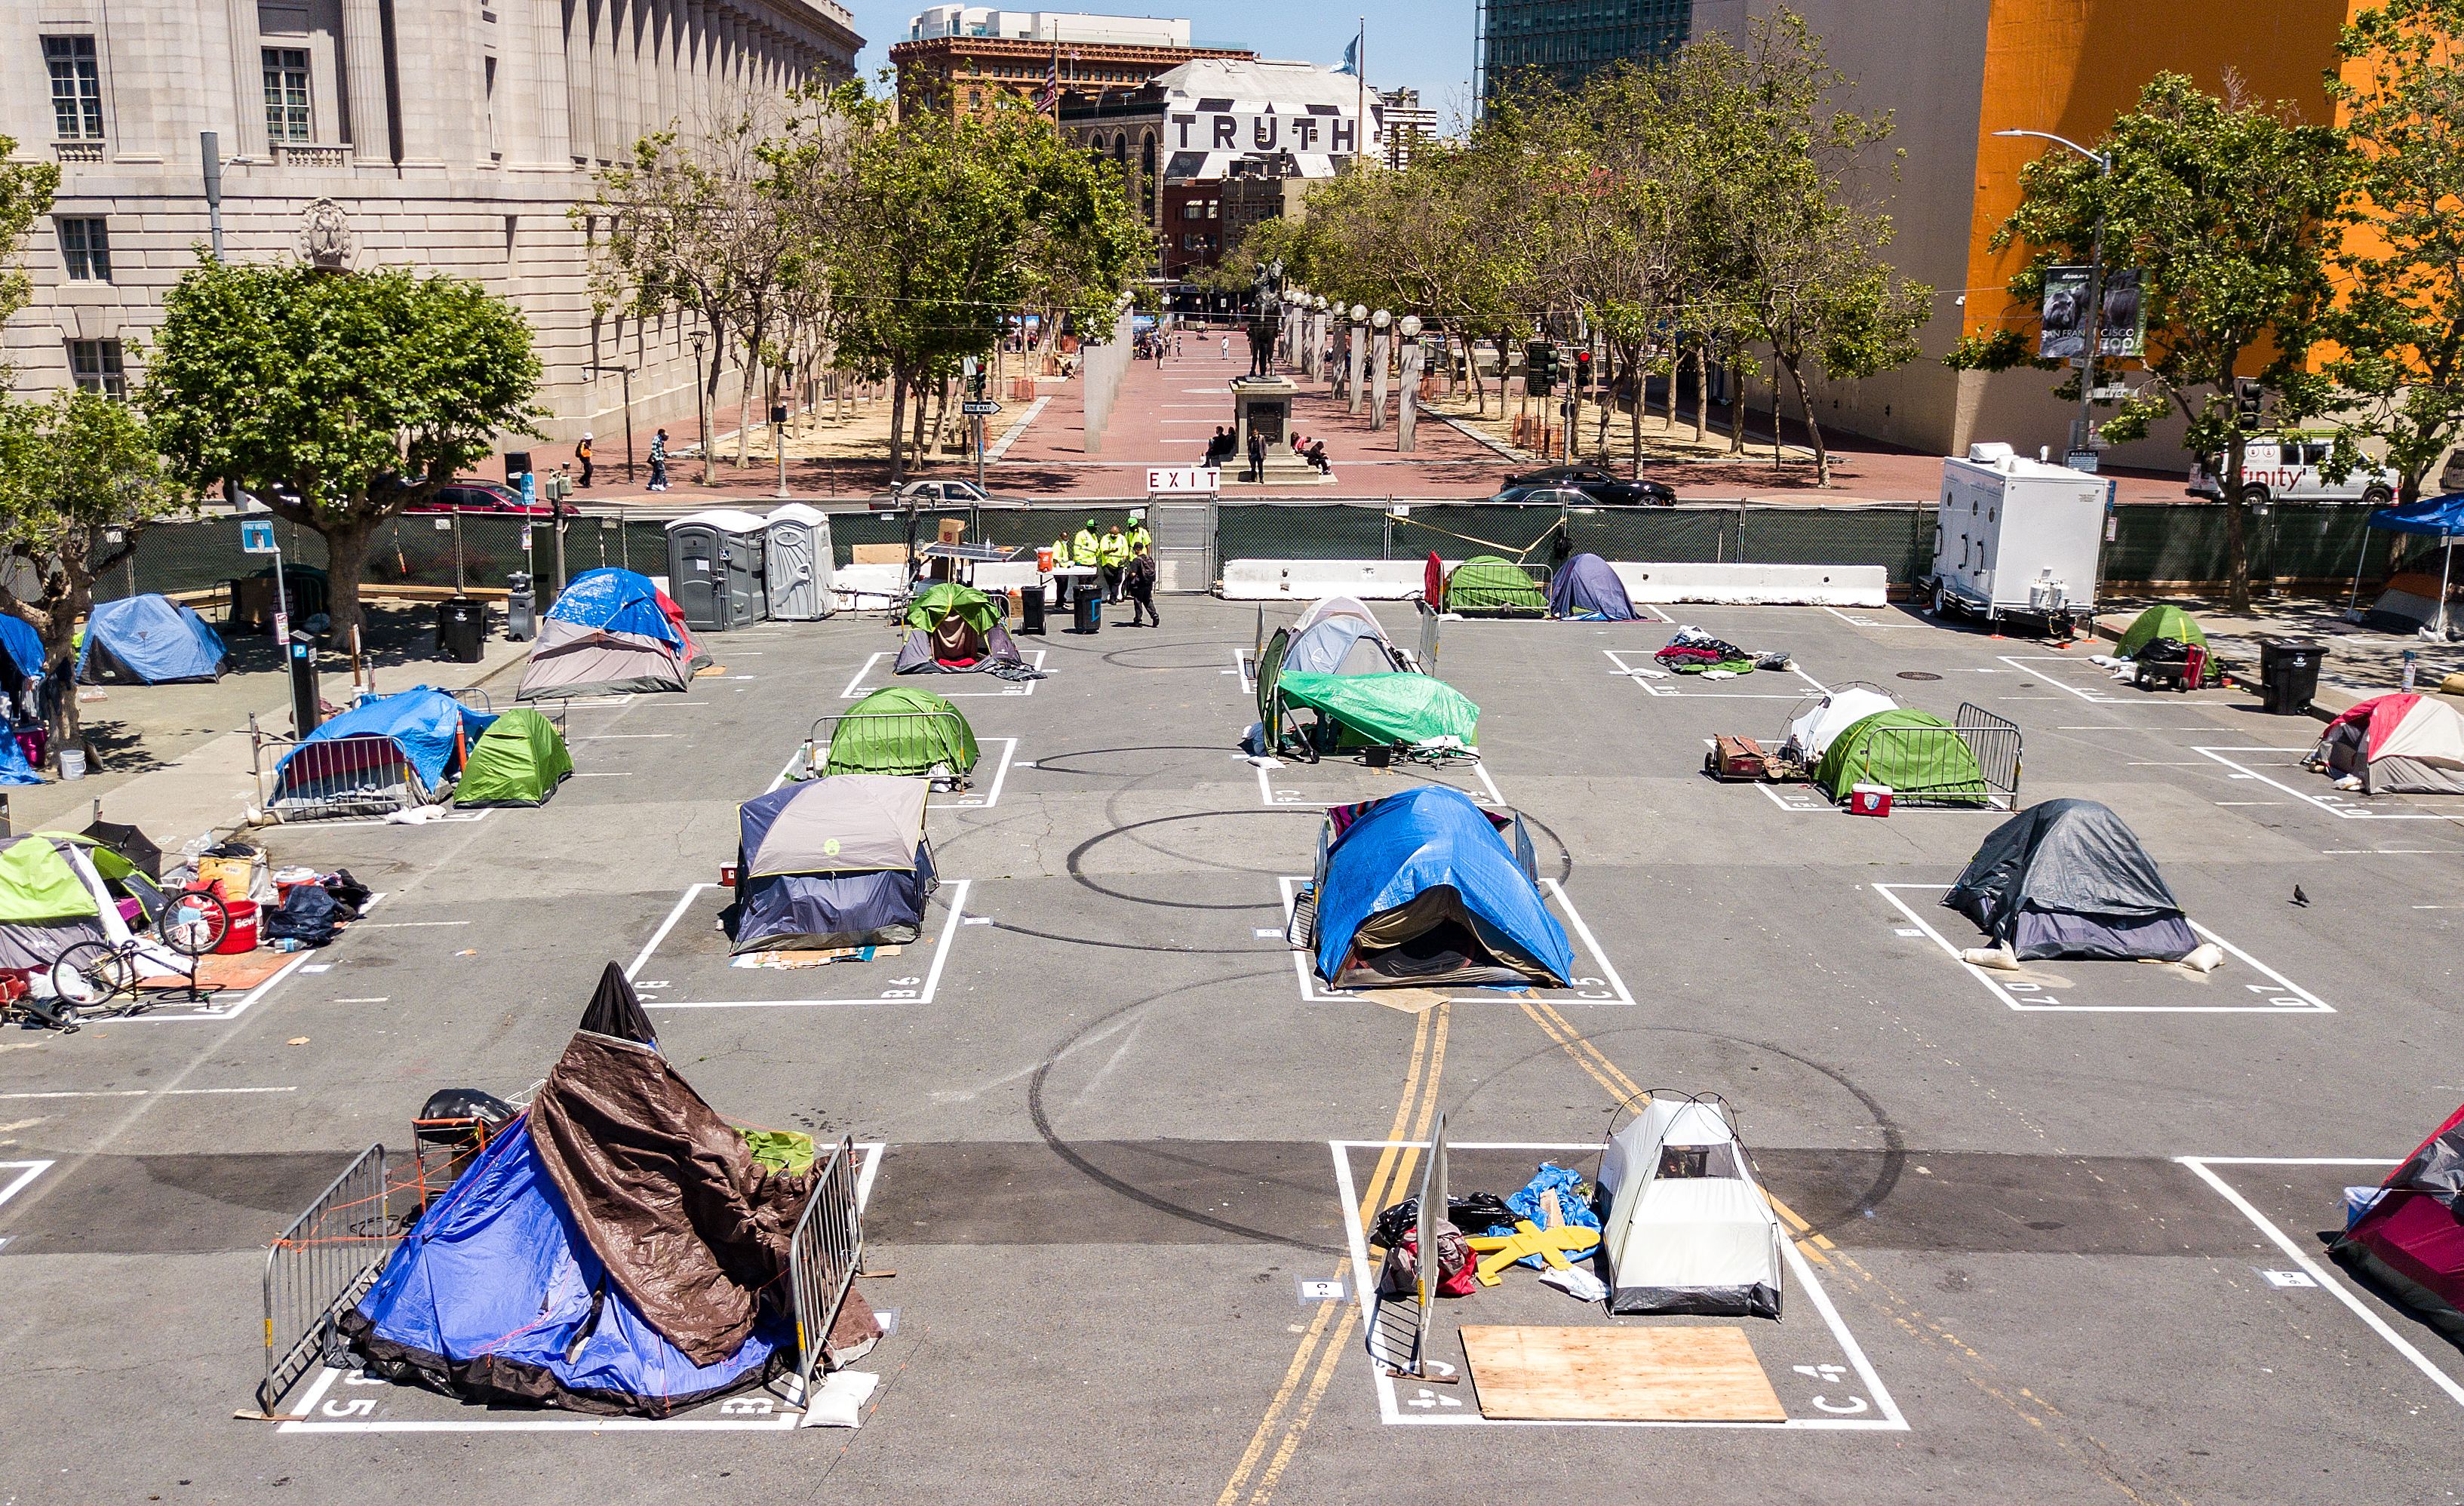 Rectangles are painted on the ground to encourage homeless people to keep social distancing at a city-sanctioned homeless encampment across from City Hall in San Francisco, California, on May 22, 2020, amid the novel coronavirus pandemic. (Photo by JOSH EDELSON/AFP via Getty Images)